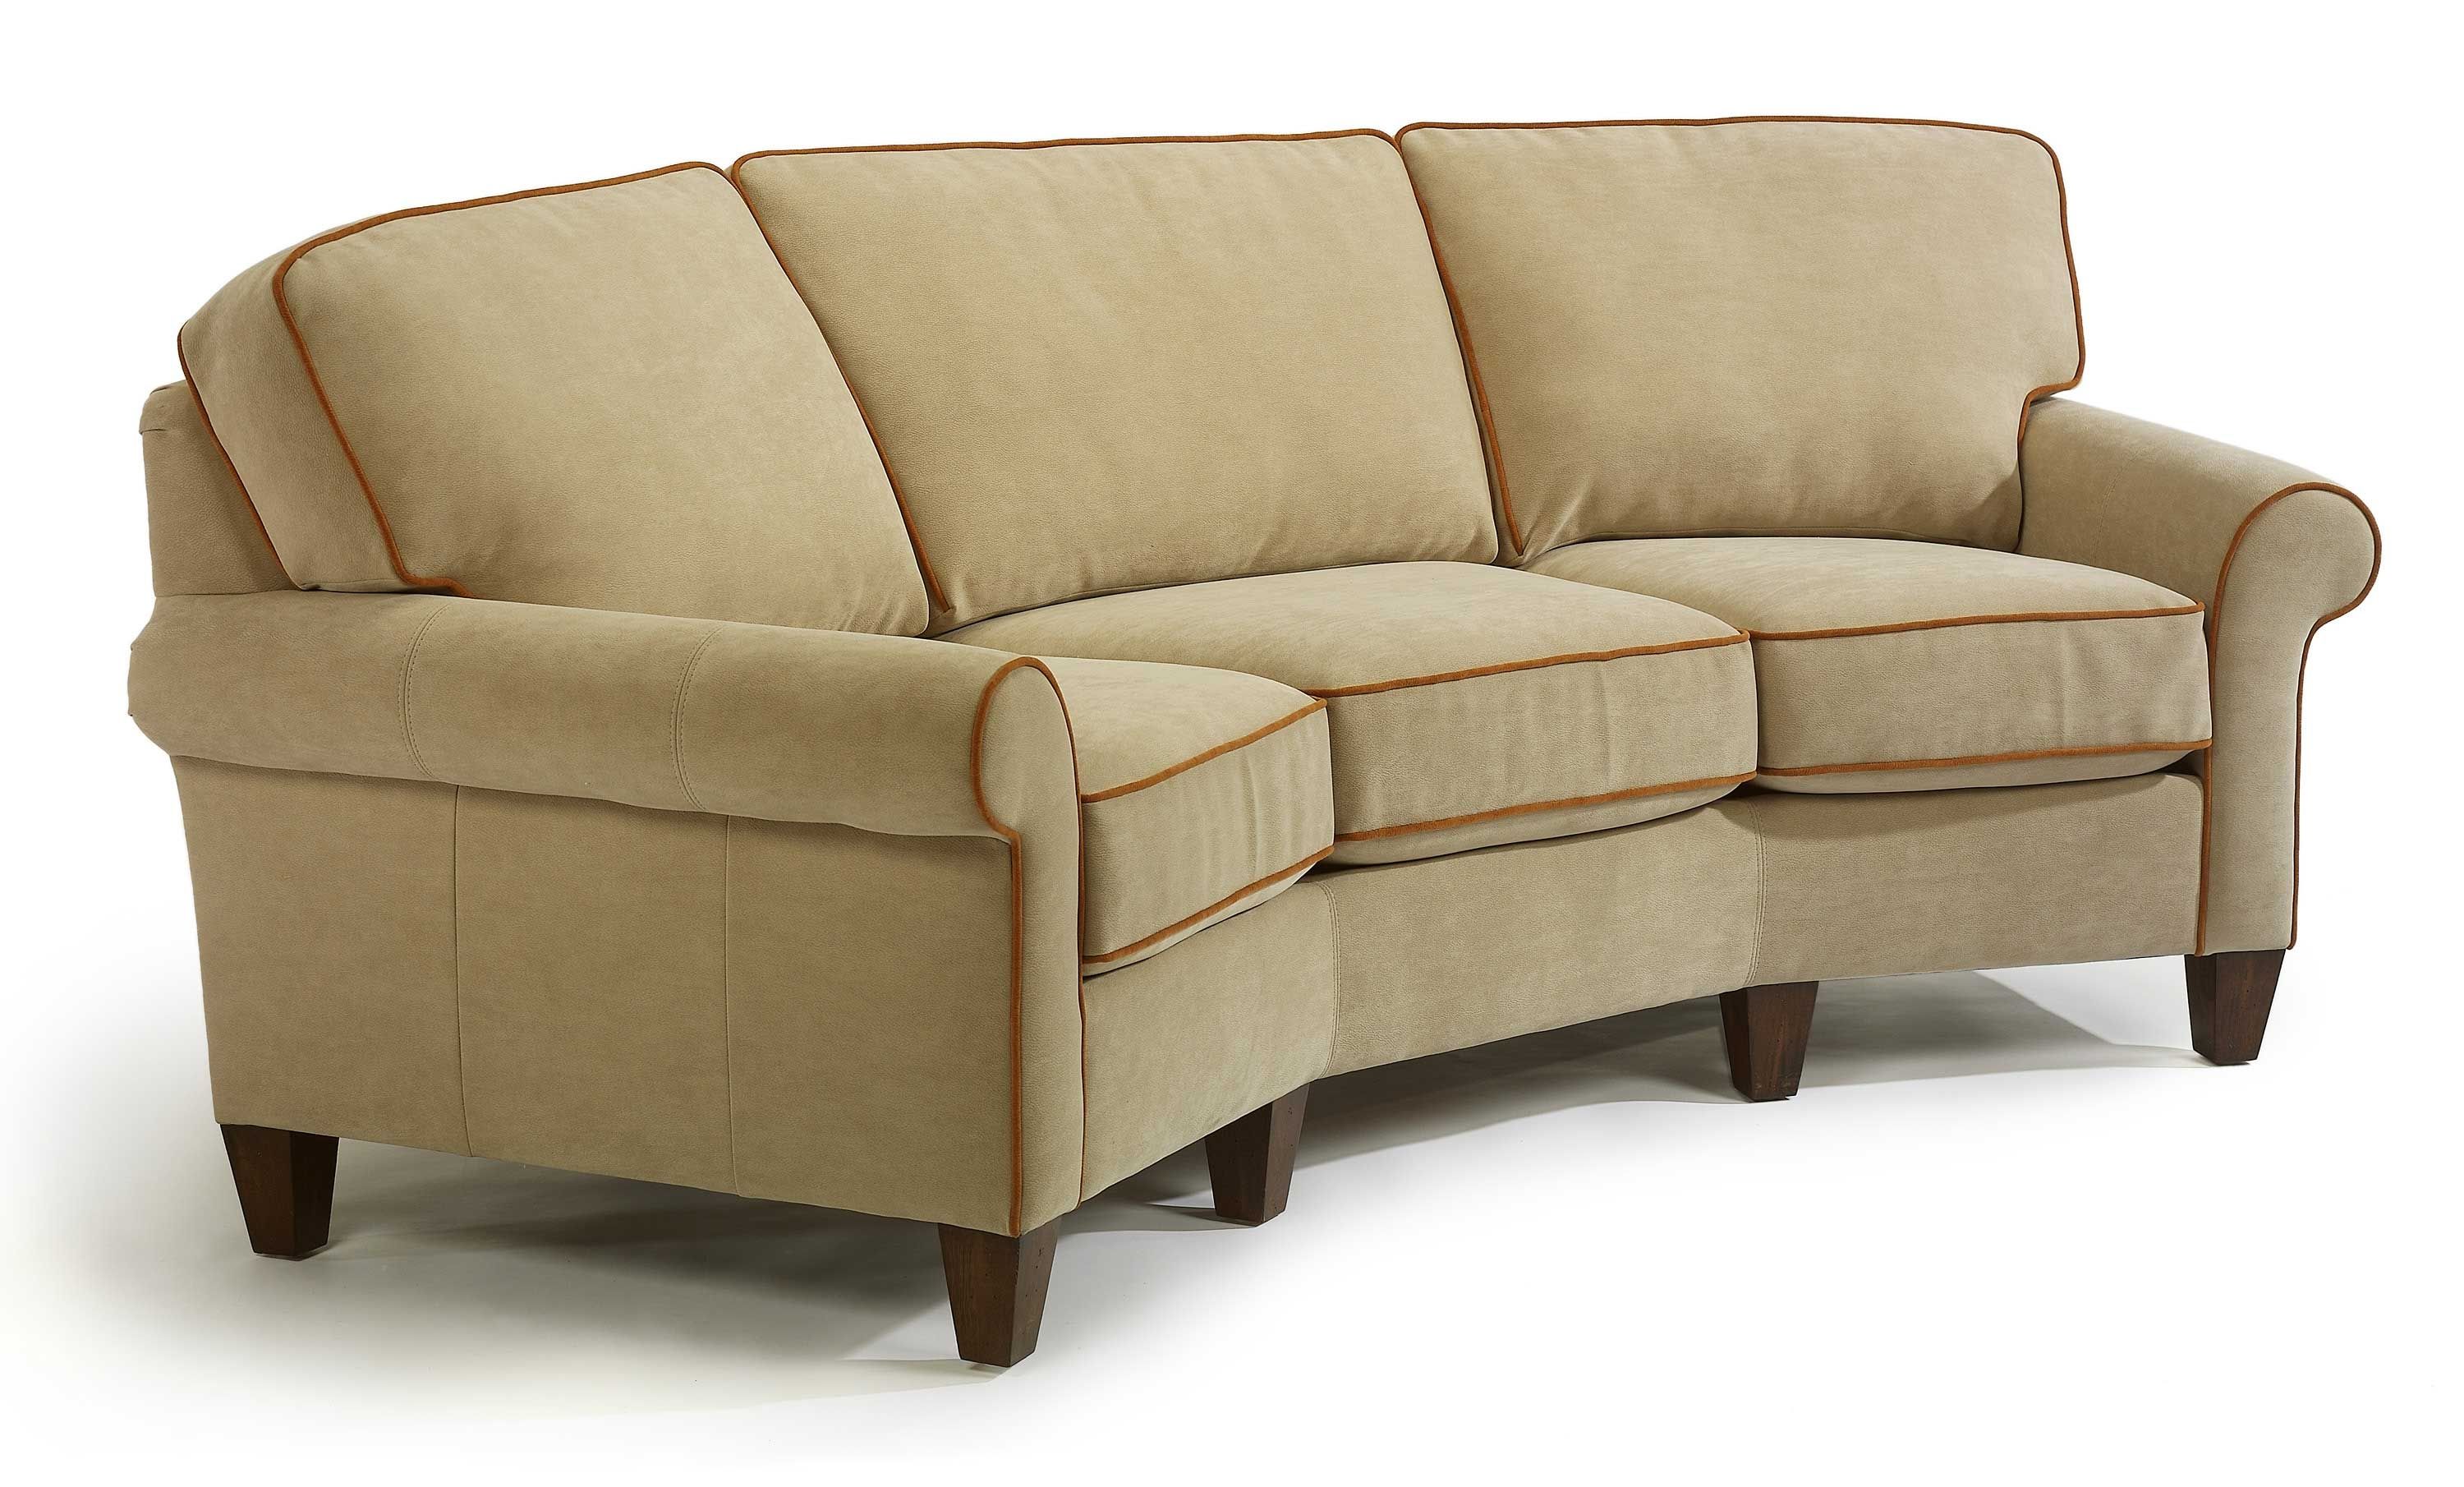 Jasens Furniture Your Flexsteel Dealers In Michigan With Sofa Chairs (View 8 of 15)